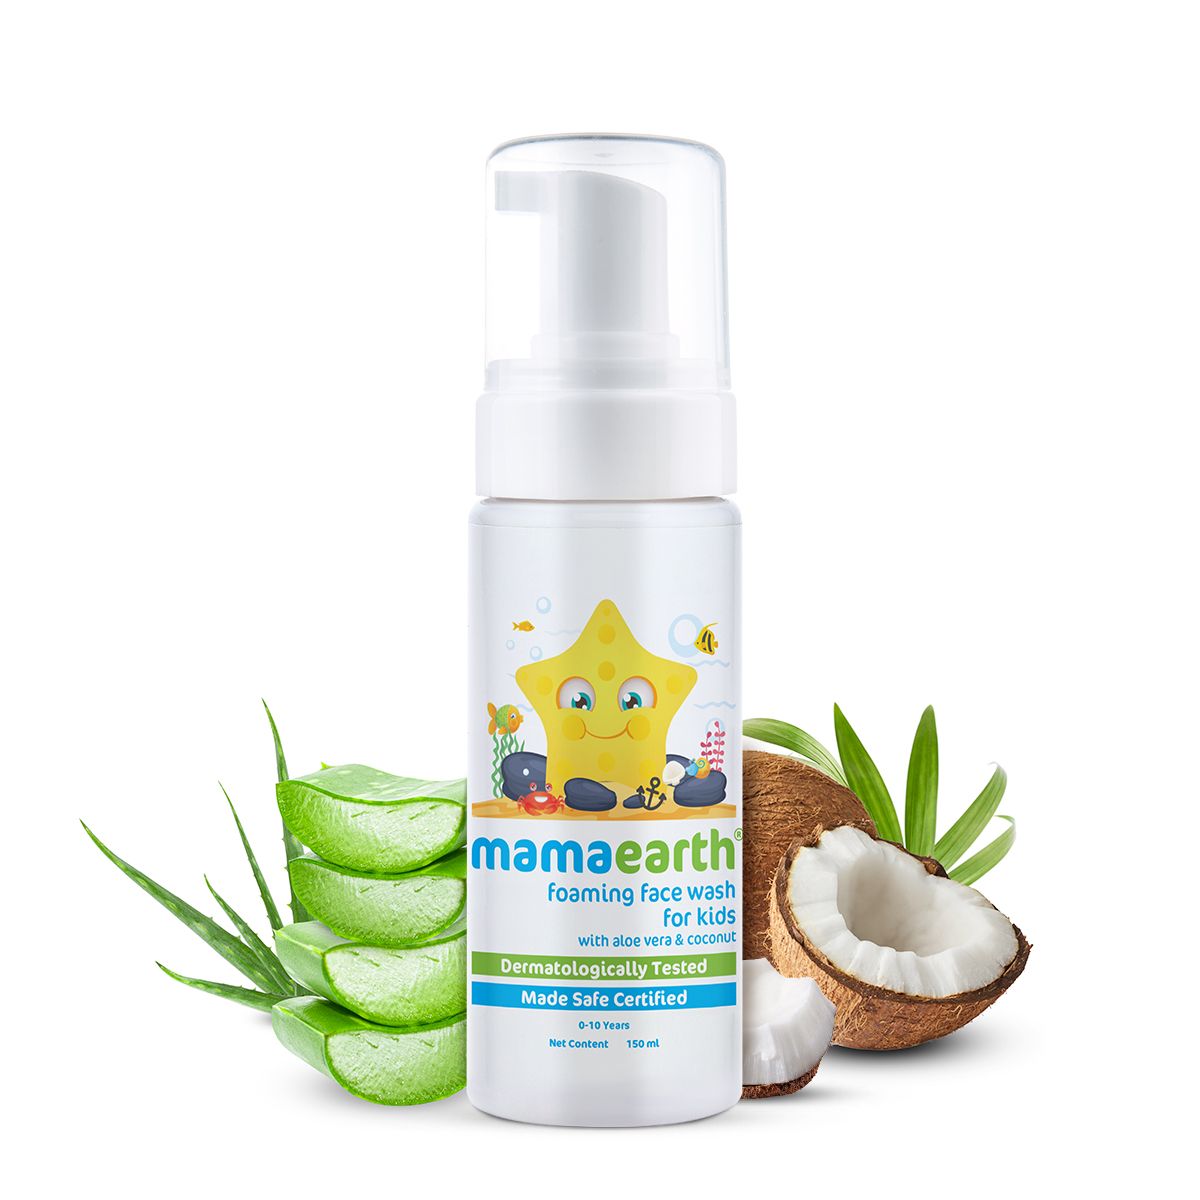 Mamaearth foaming facewash for kids in all baby products